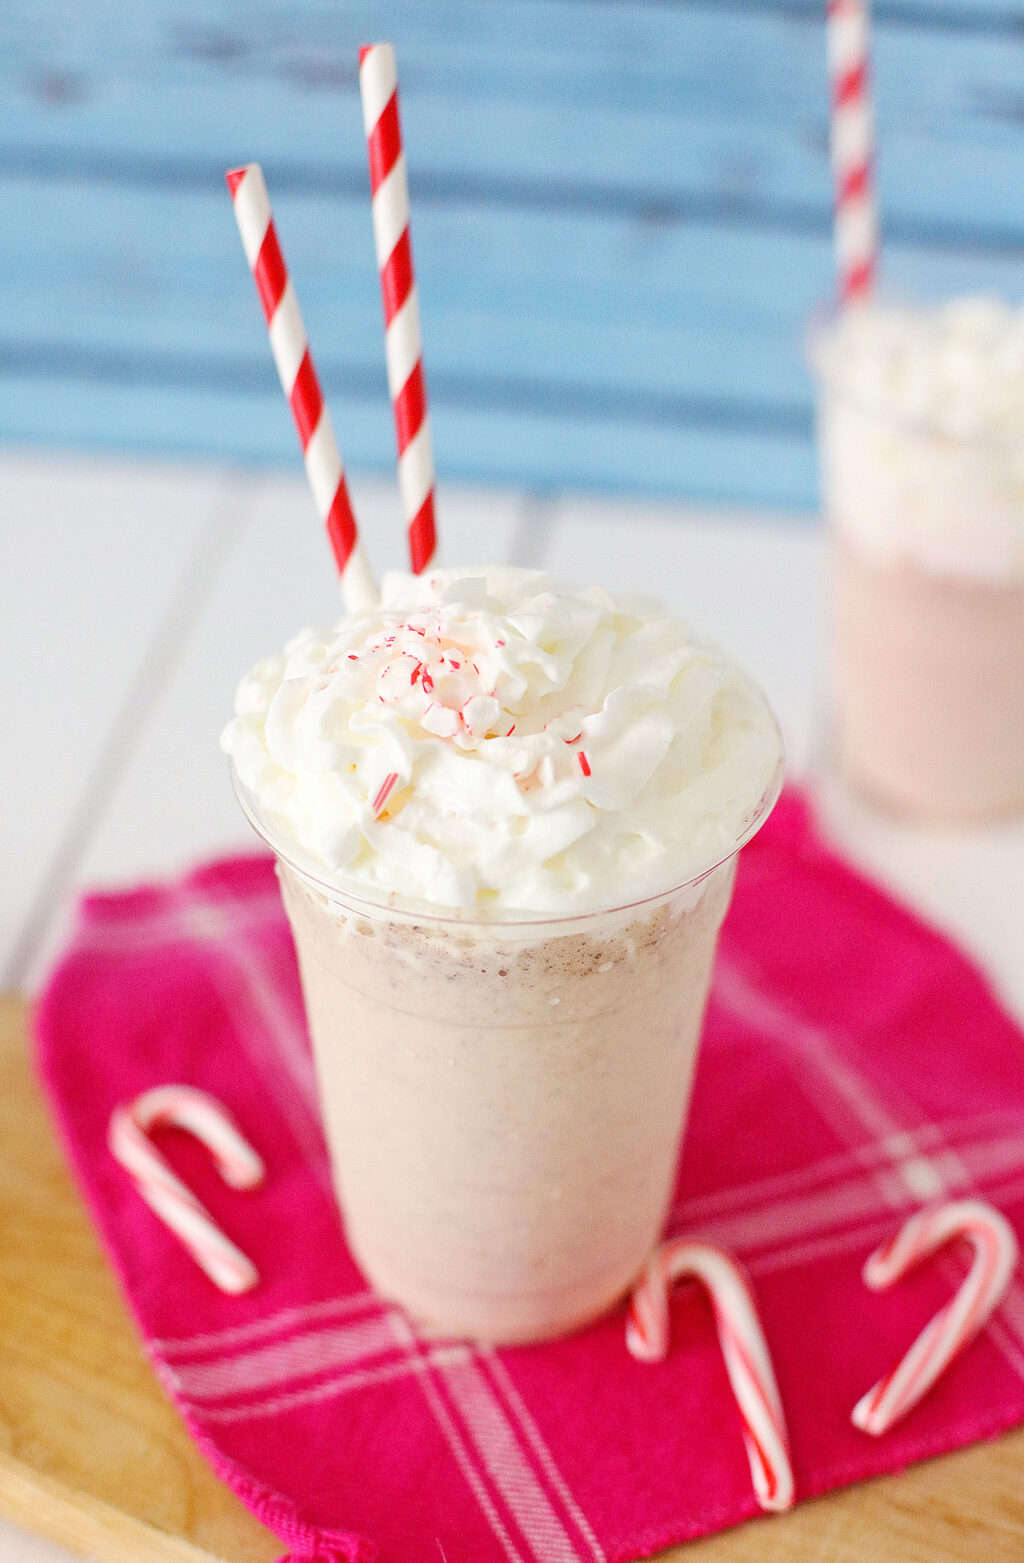 upclose view of Copycat Chick-Fil-A Peppermint Shake in a clear cup